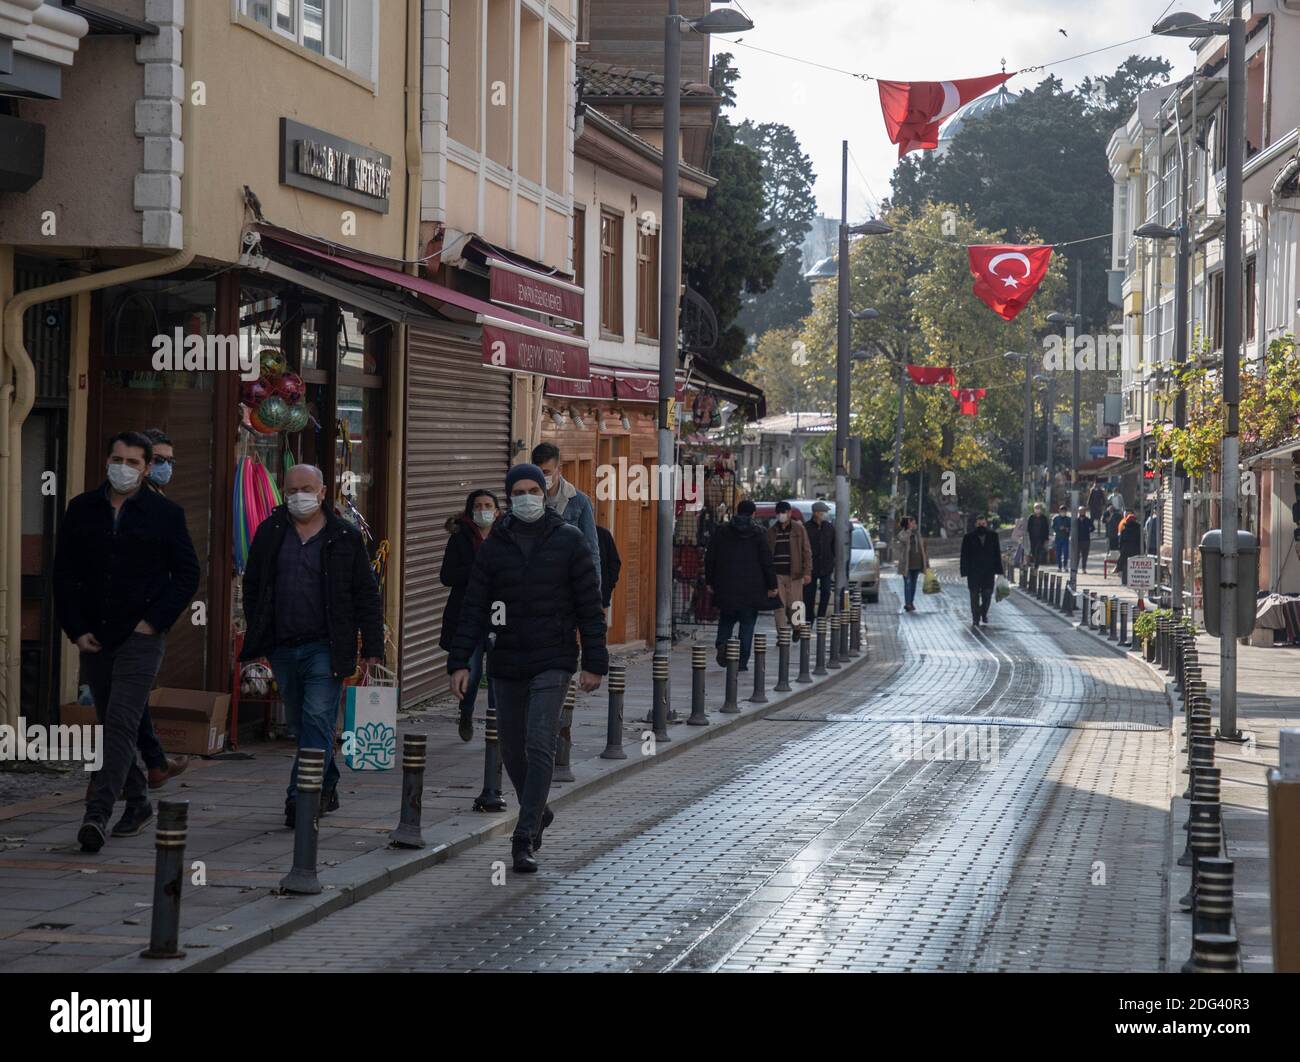 Sile, Turkey. 7th Dec, 2020. People walk in Sile, a small fishing town some 70 km from Istanbul, Turkey, on Dec. 7, 2020. The concerns with the COVID-19 pandemic are causing more and more residents in Turkey's largest city Istanbul to move to the city's remote seaside districts along the shores of the Black Sea and the Marmara Sea. Credit: Osman Orsal/Xinhua/Alamy Live News Stock Photo